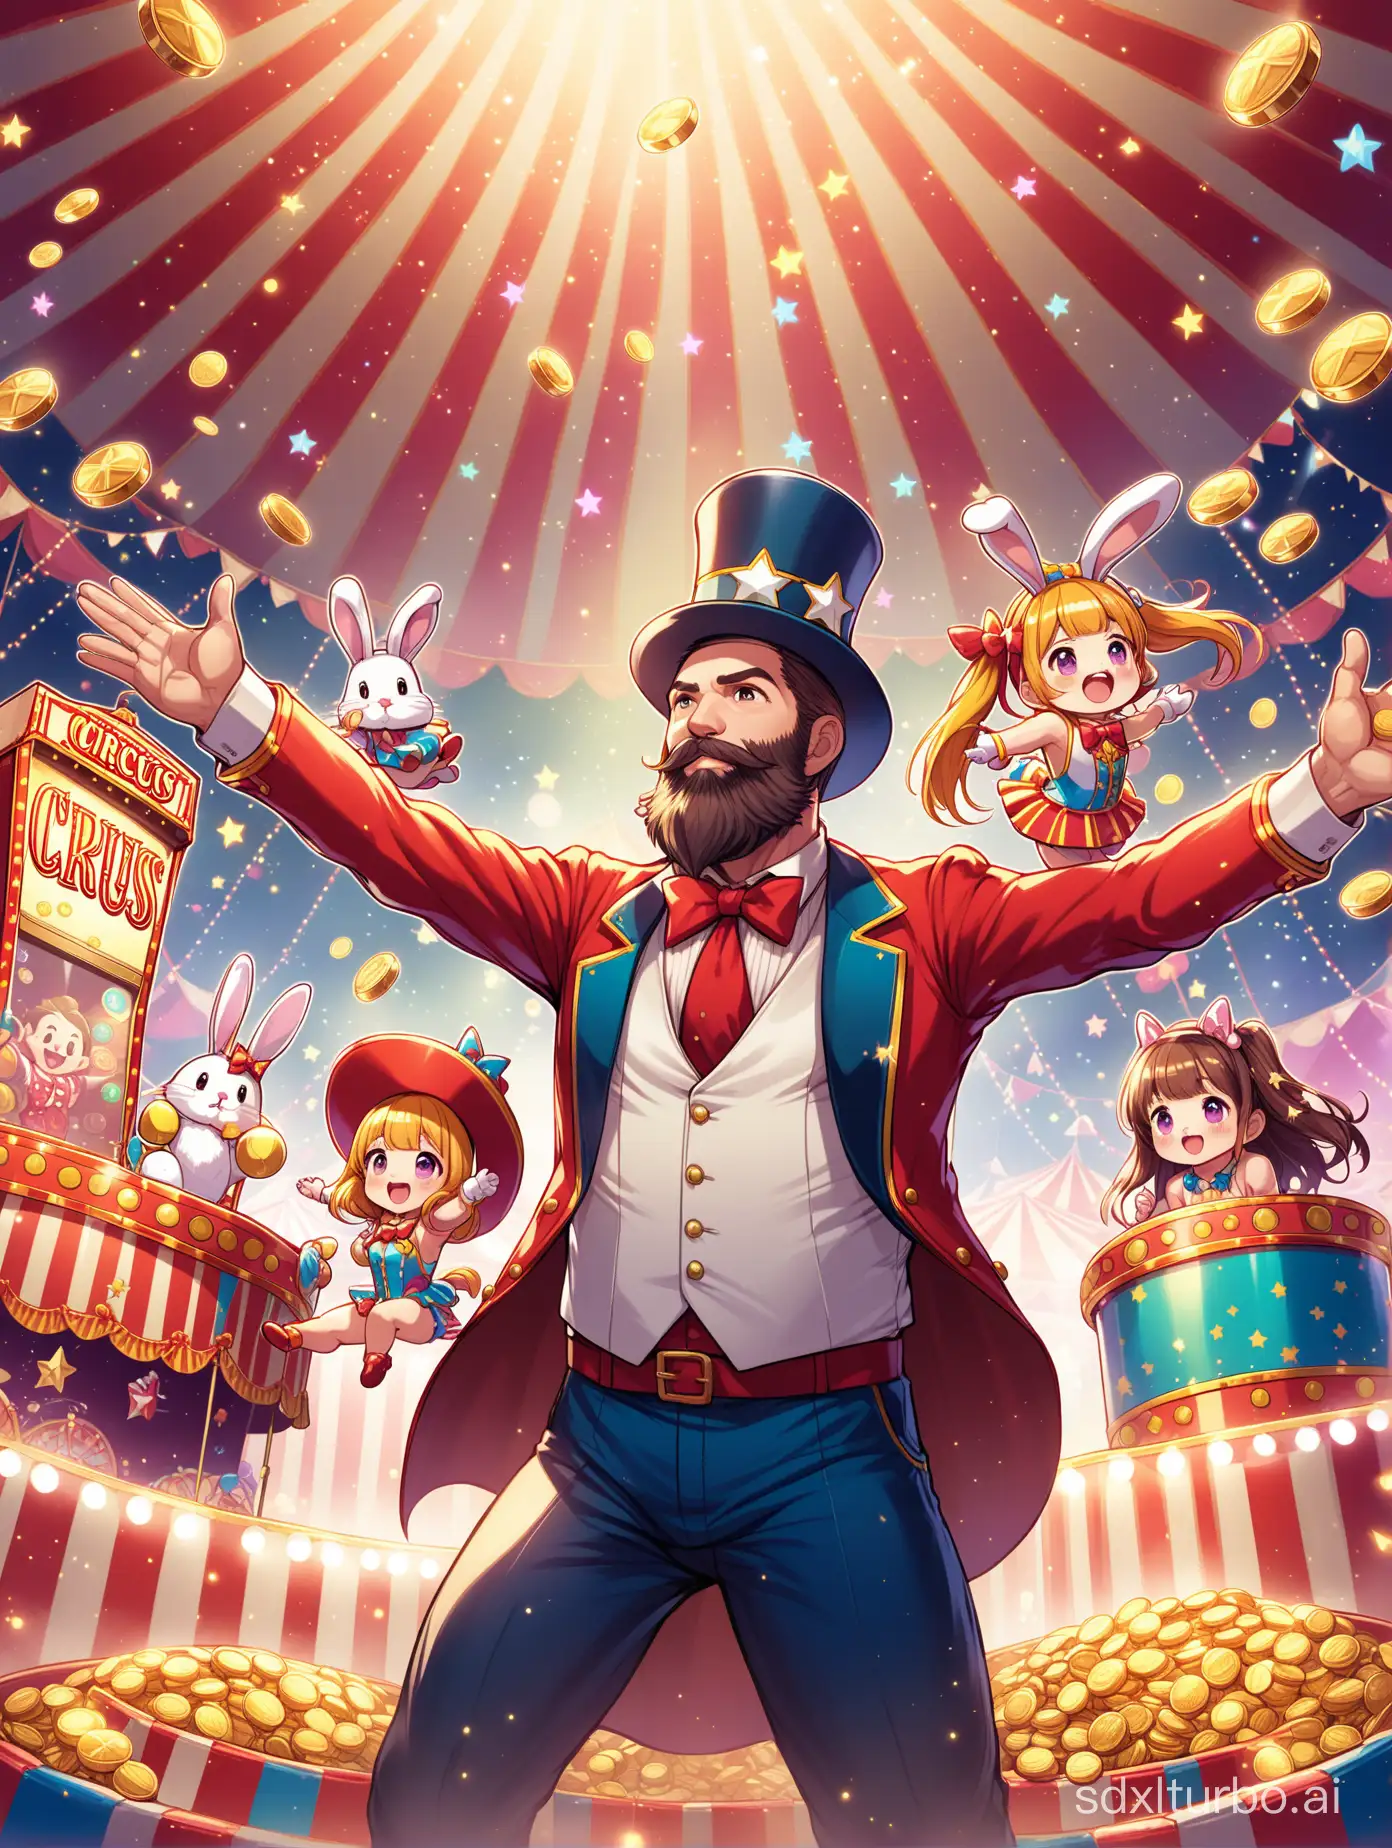 Circus, arcade, video games, bearded uncle with a star hat and a bunny girl, coins flying